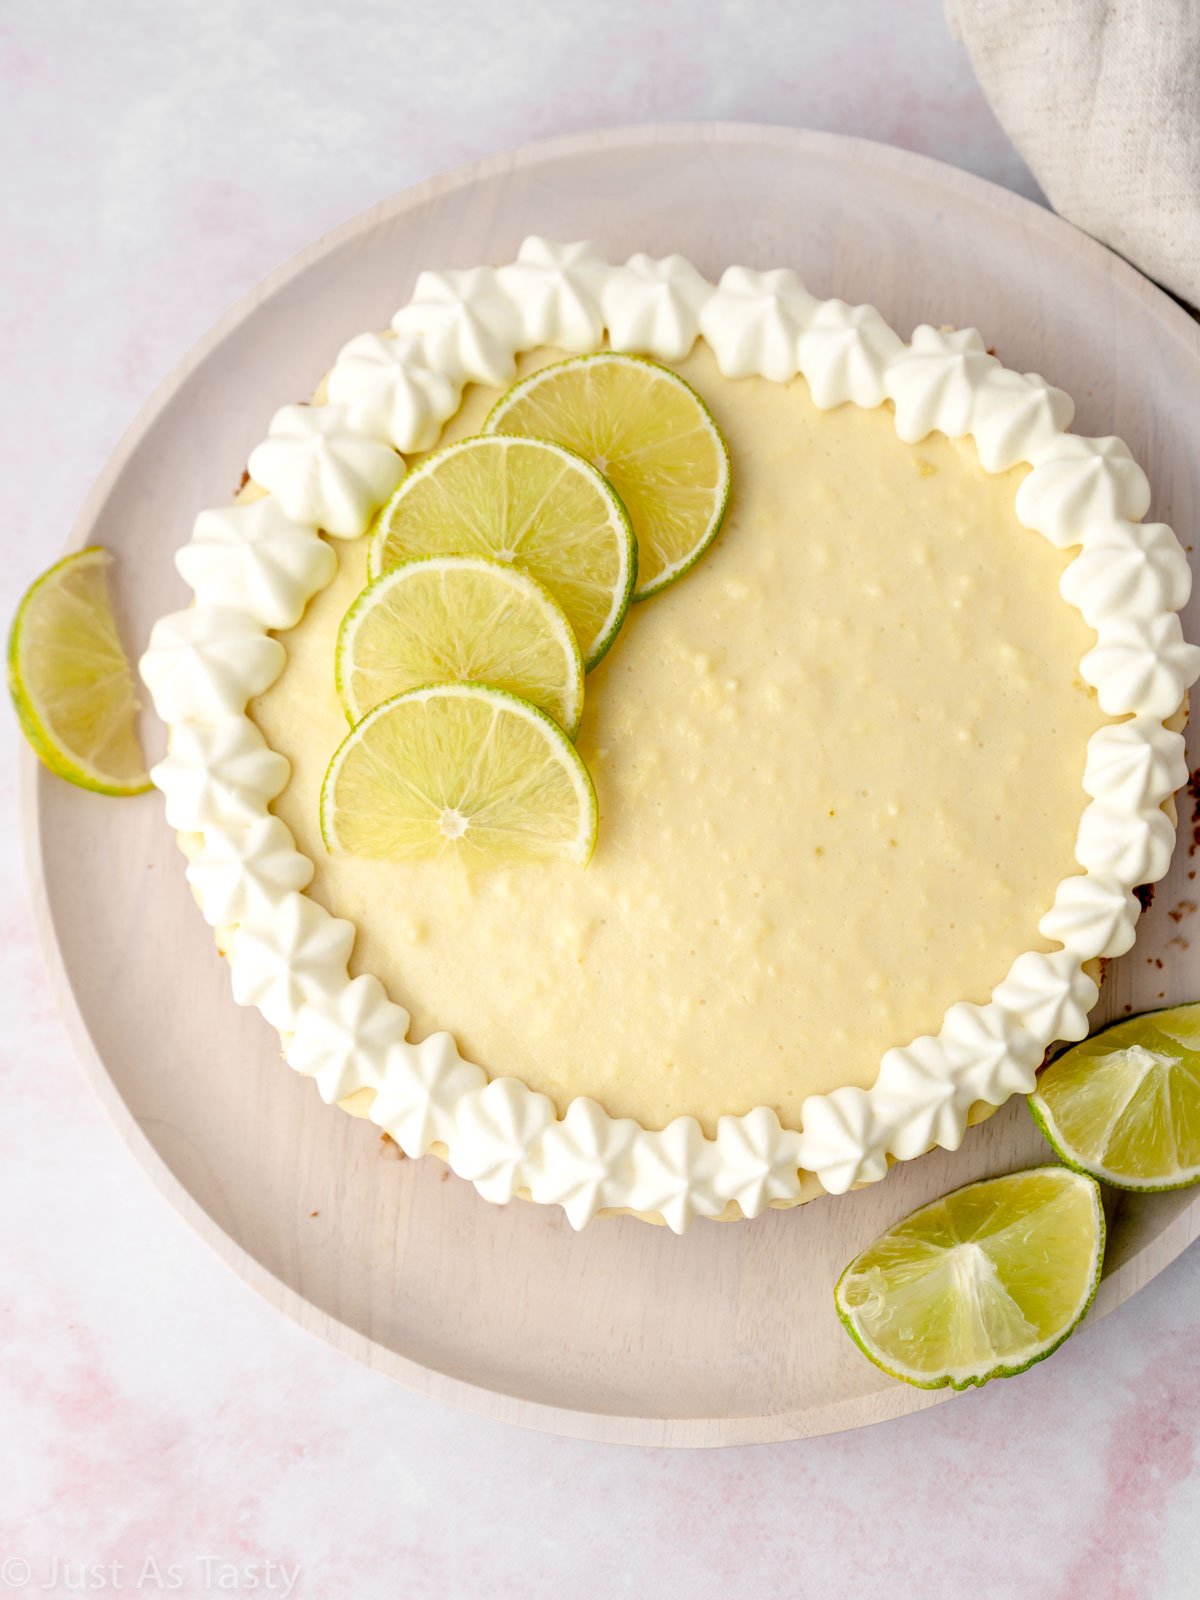 Key lime pie topped with whipped cream and lime slices.